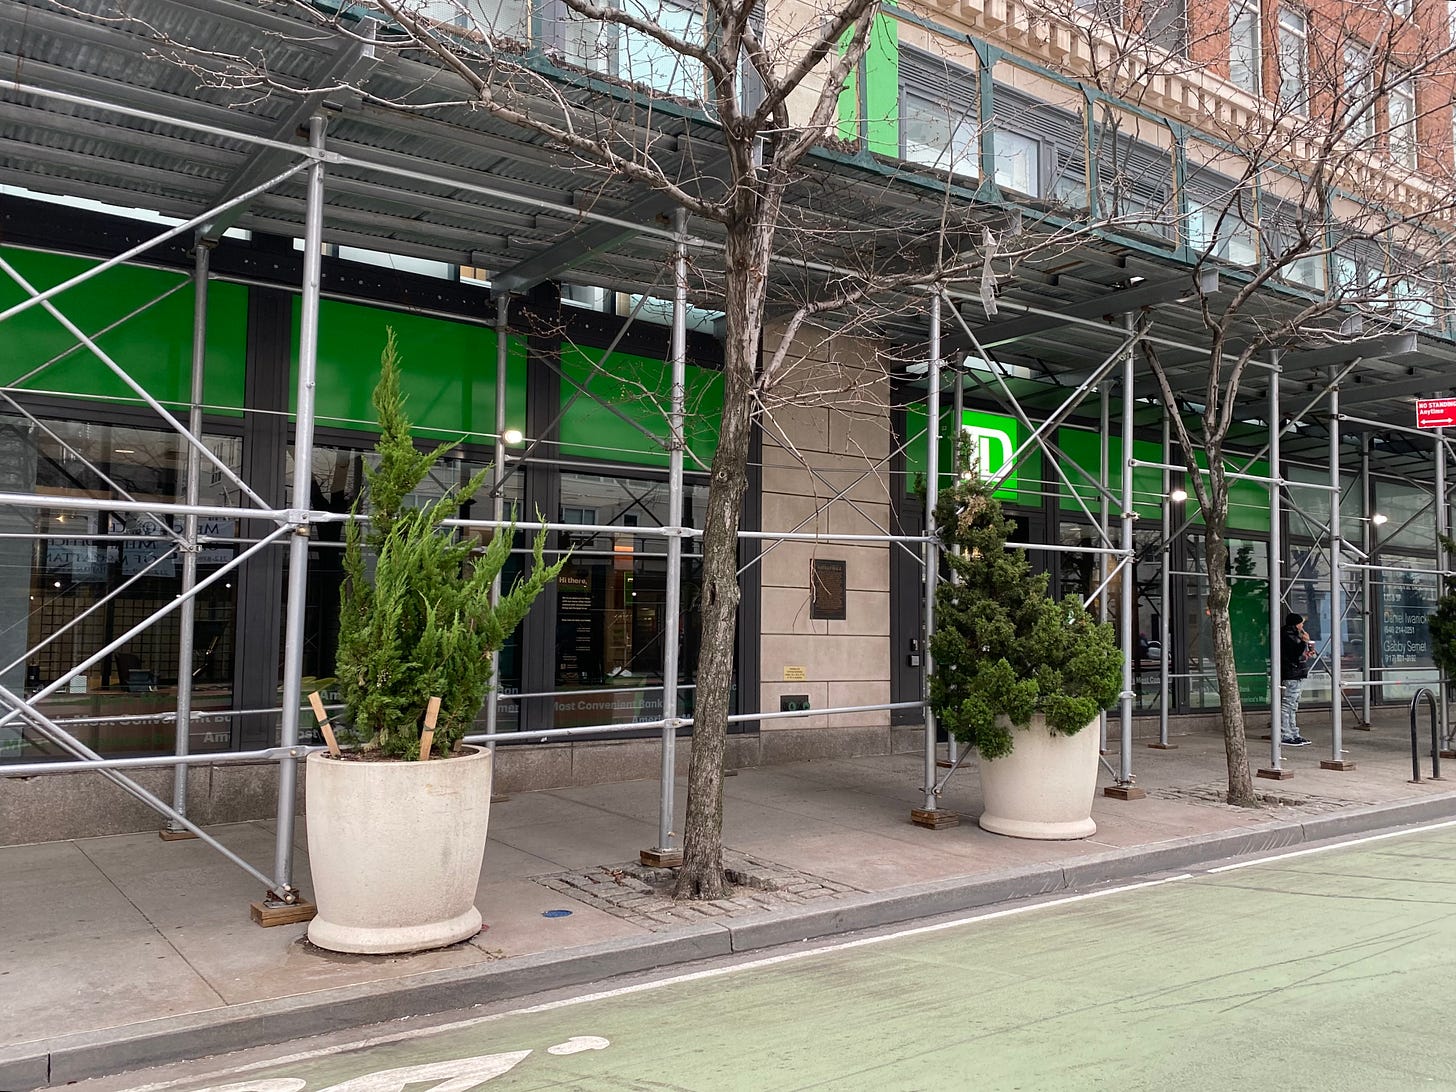 A high rise building with a TD Bank on the ground floor. There is construction scaffolding across the front a plaque just visible near the door.